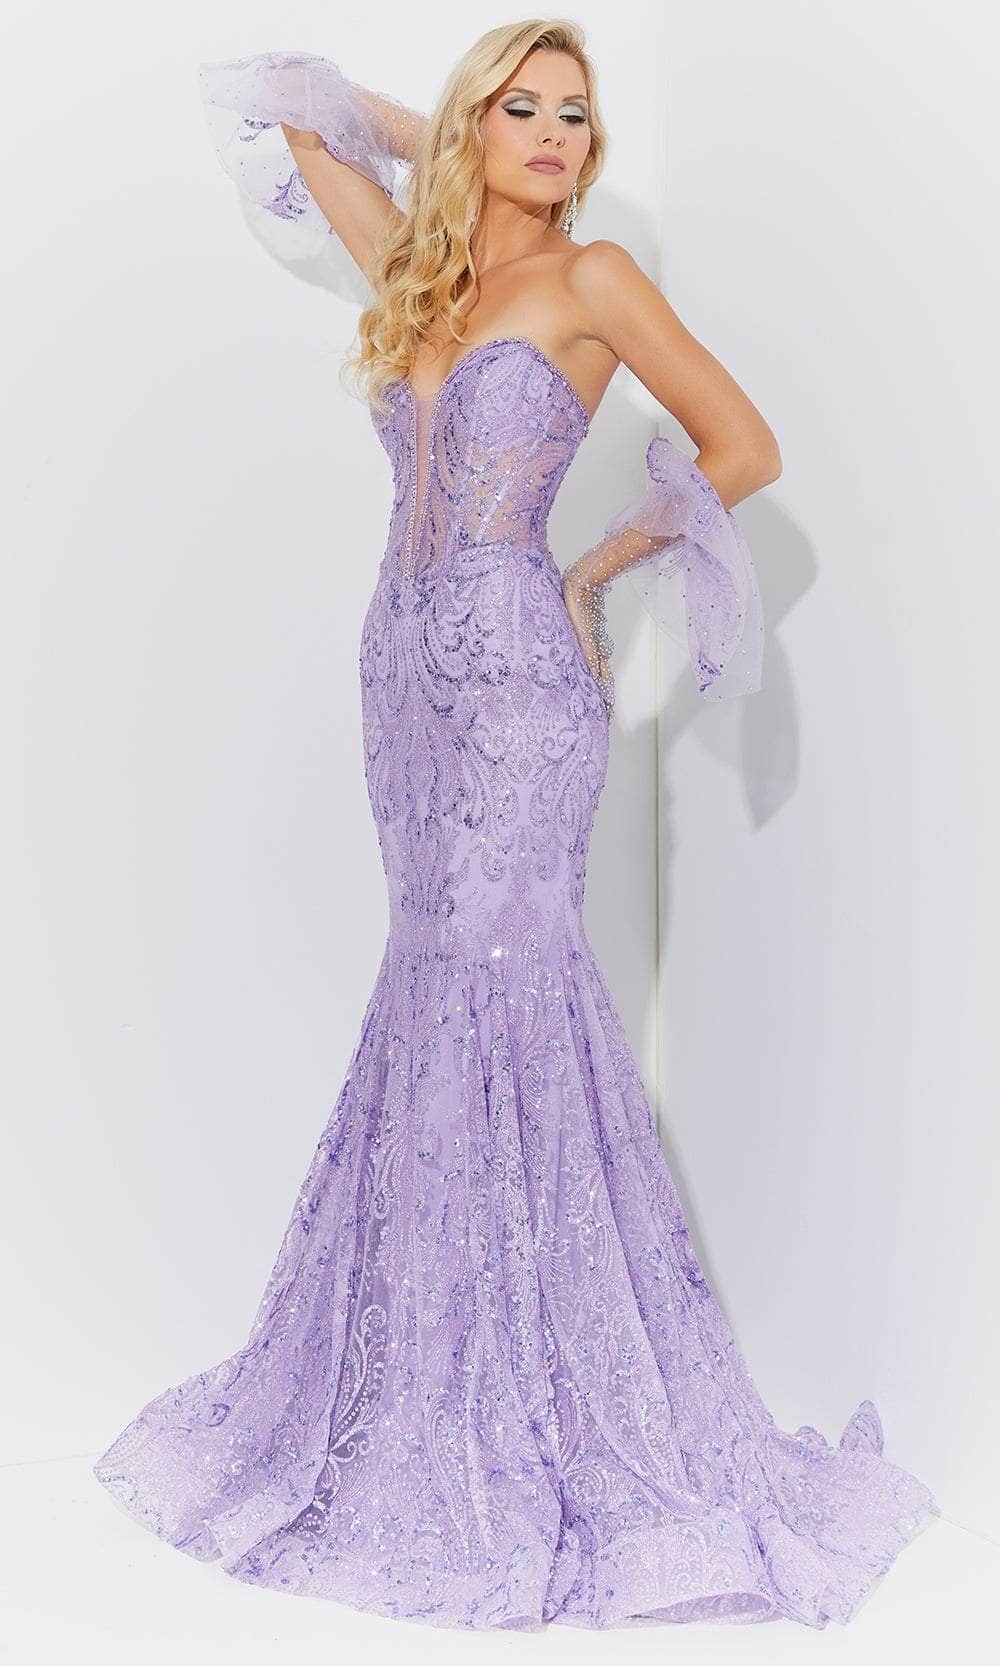 Jasz Couture 7521 - Sequin Motif Sweetheart Prom Dress Special Occasion Dress 00 / Lilac